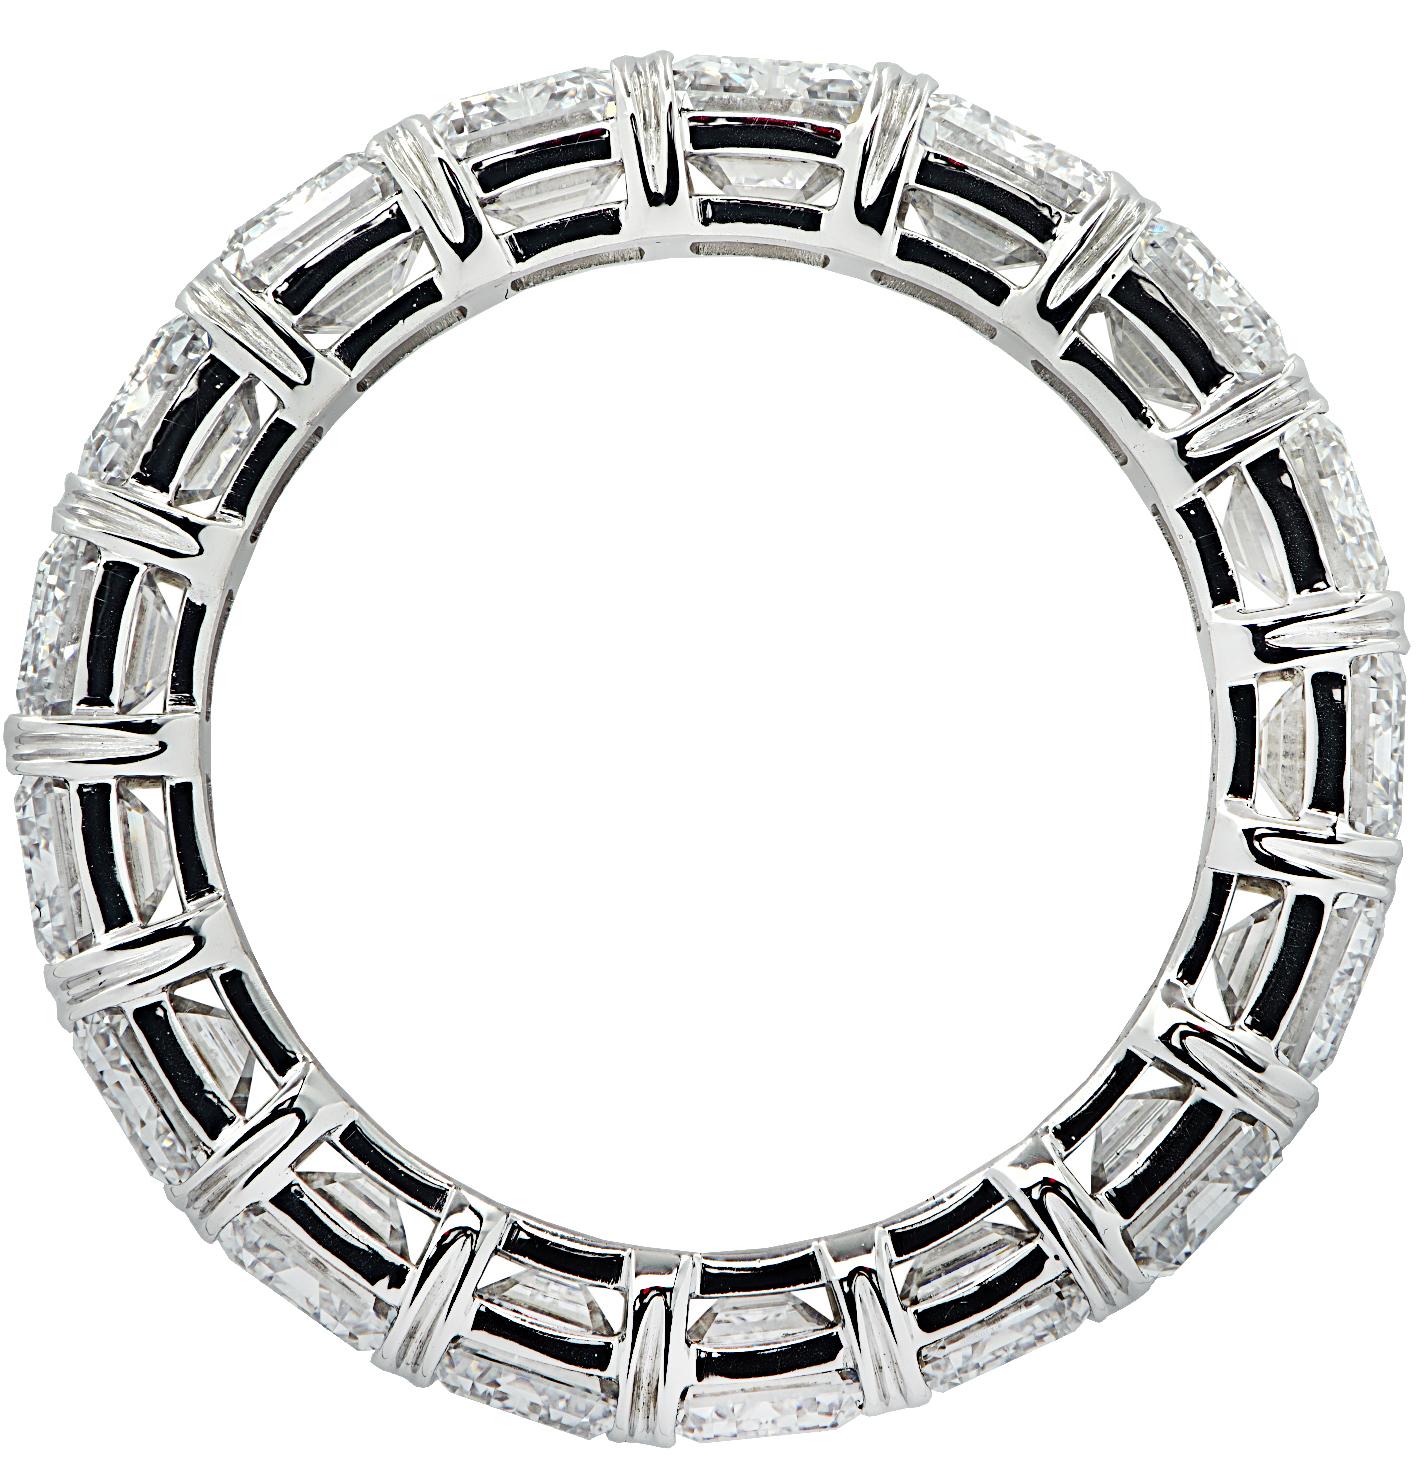 Exquisite Vivid Diamonds eternity band crafted in Platinum, showcasing 17 stunning GIA Certified emerald cut diamonds weighing 9.47 carats total, D color, VVS1-VVS2 clarity. Each diamond was carefully selected, perfectly matched, and set in a